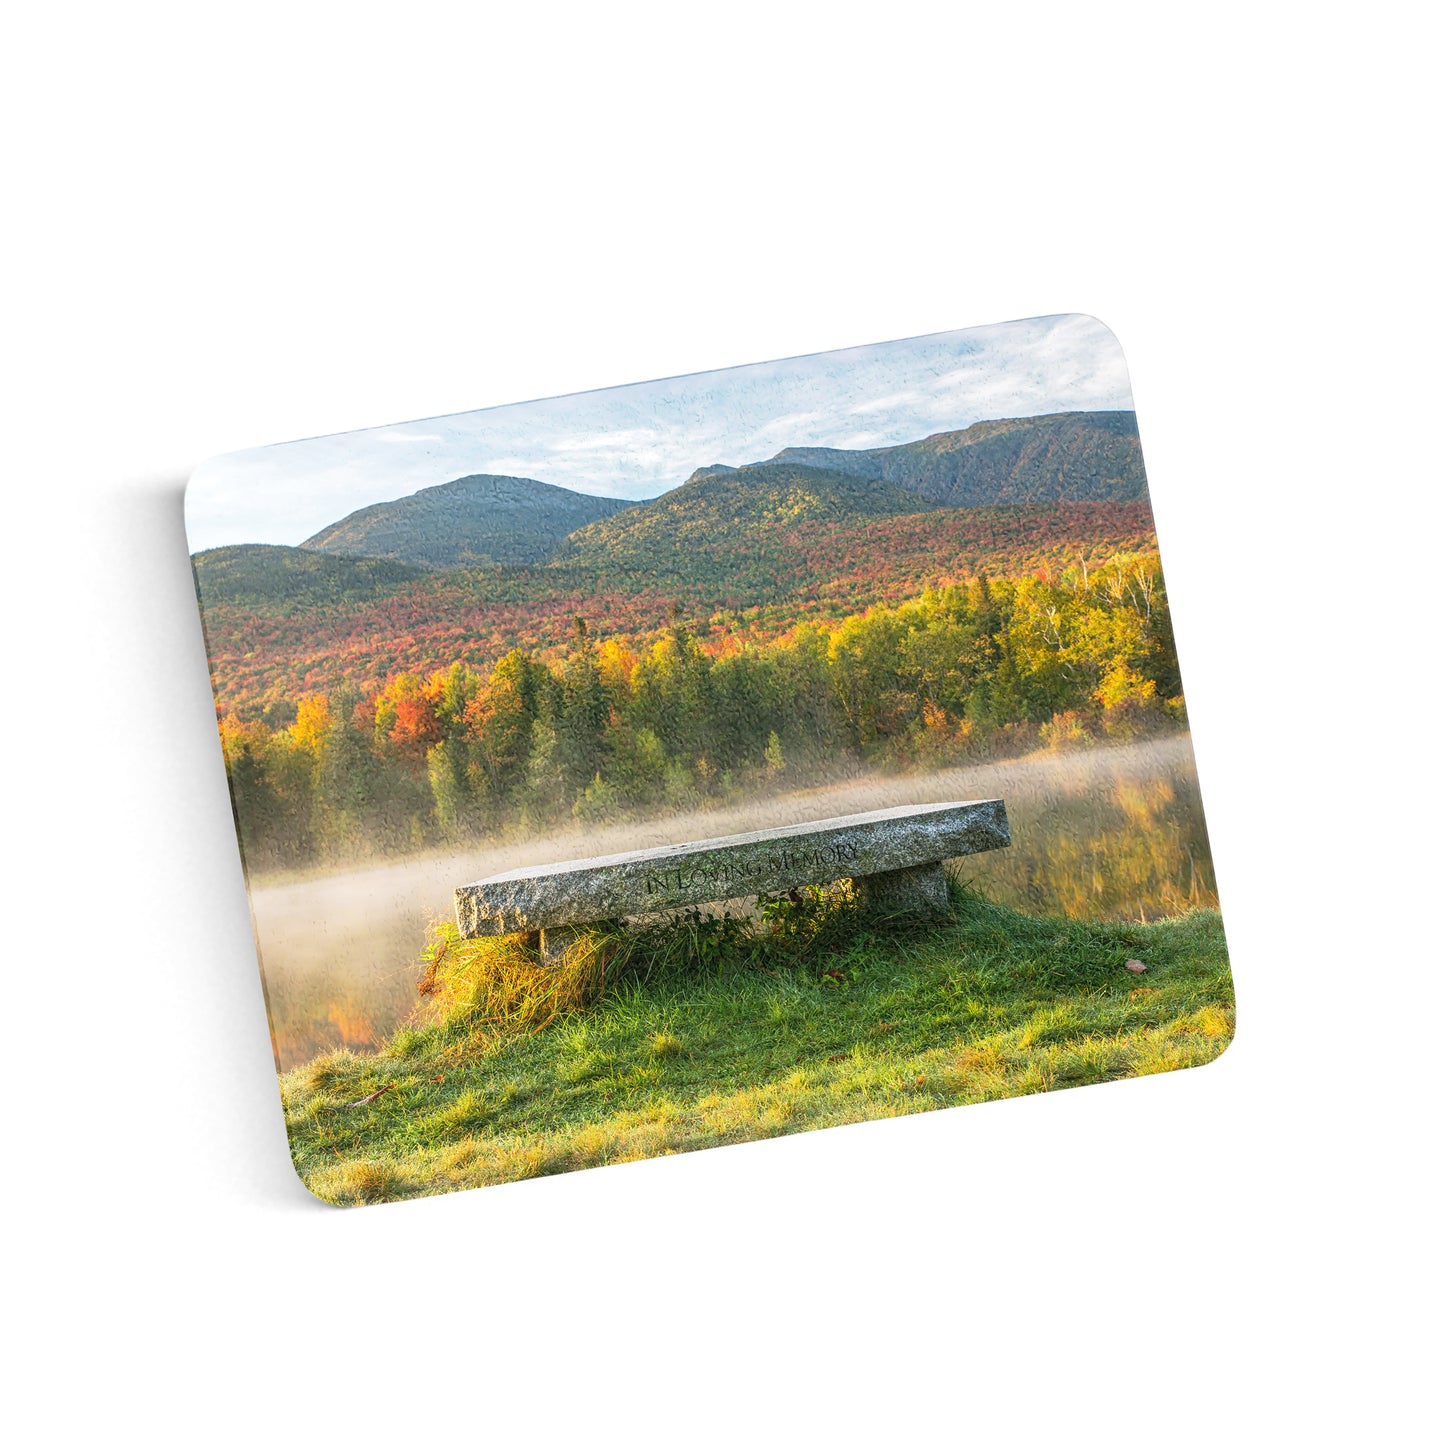 Misty Foliage Memories Cutting Board by Chris Whiton